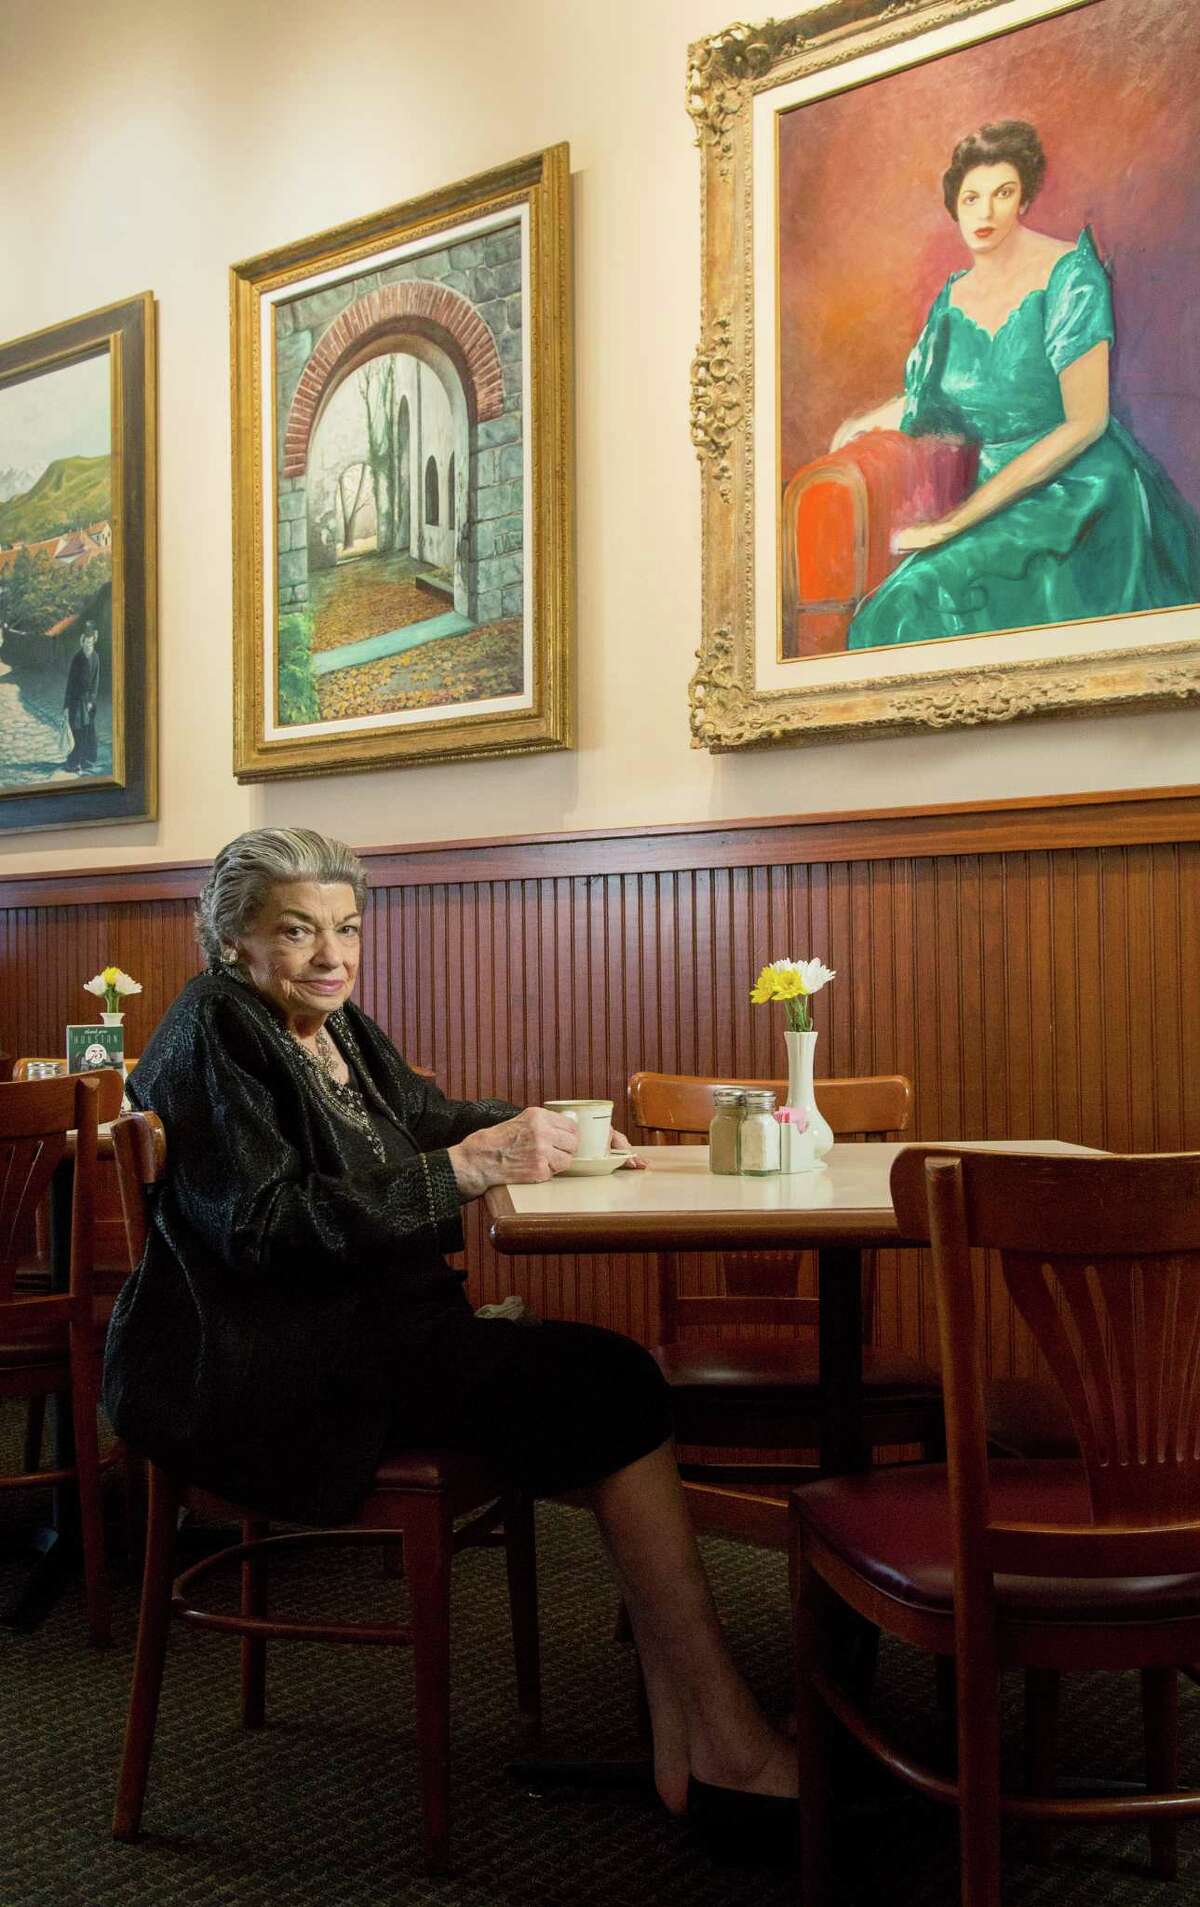 Pat Mickelis at Cleburne Cafeteria. Artwork on the walls of her restaurant were painted by her late husband, Nick.